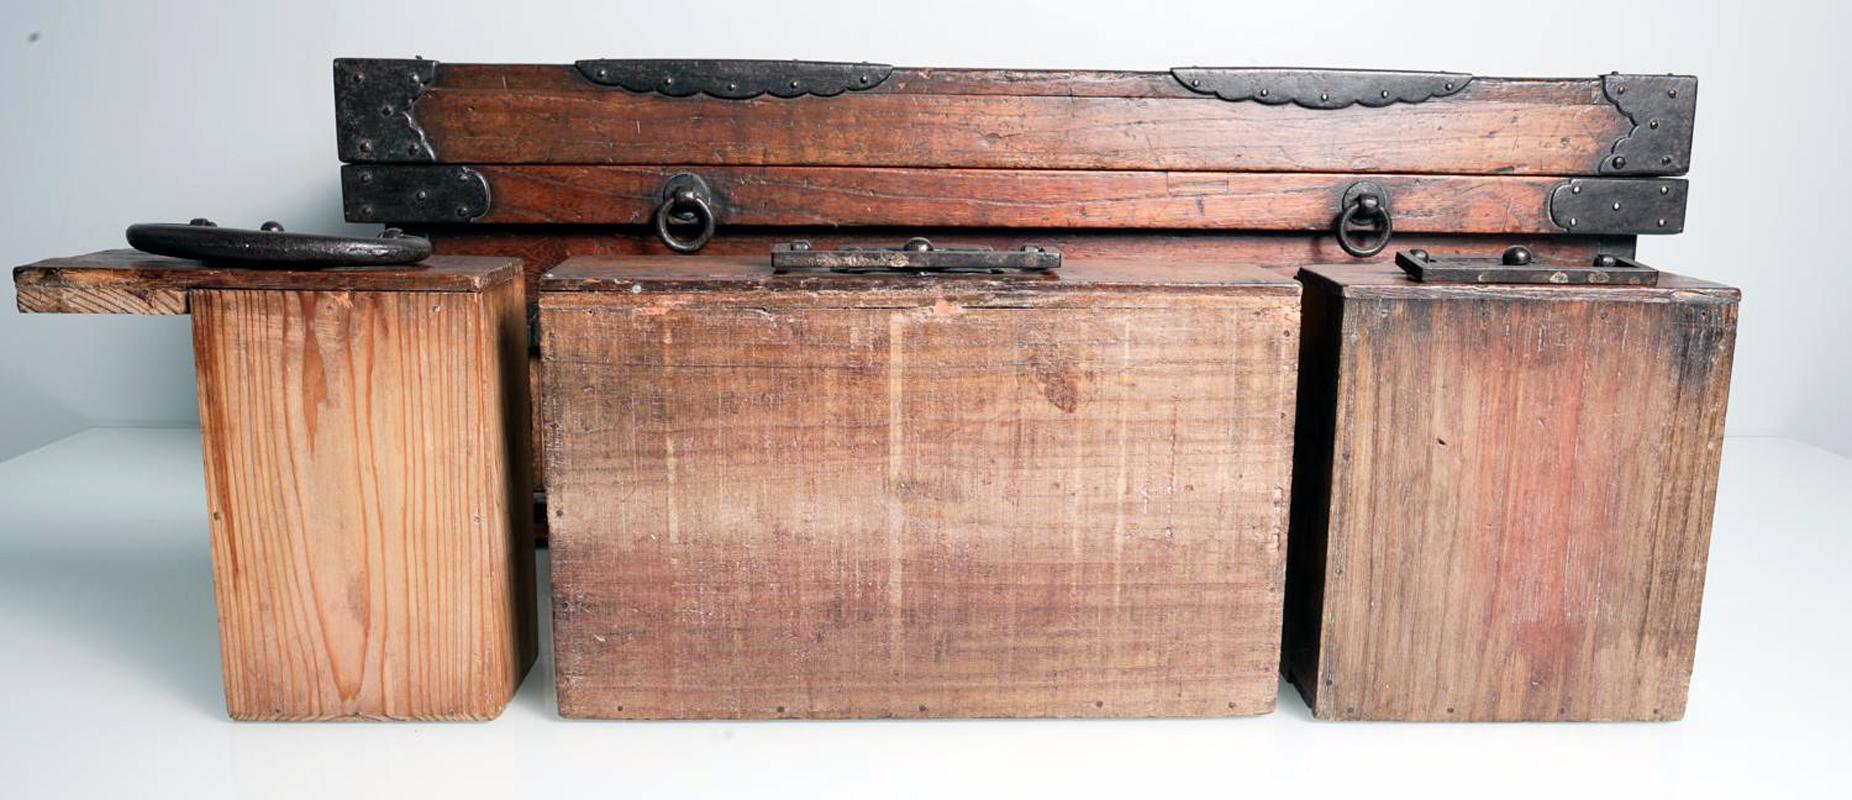 Rare Inscribed Japanese Wood Chest Zenibako on Custom Stand For Sale 2